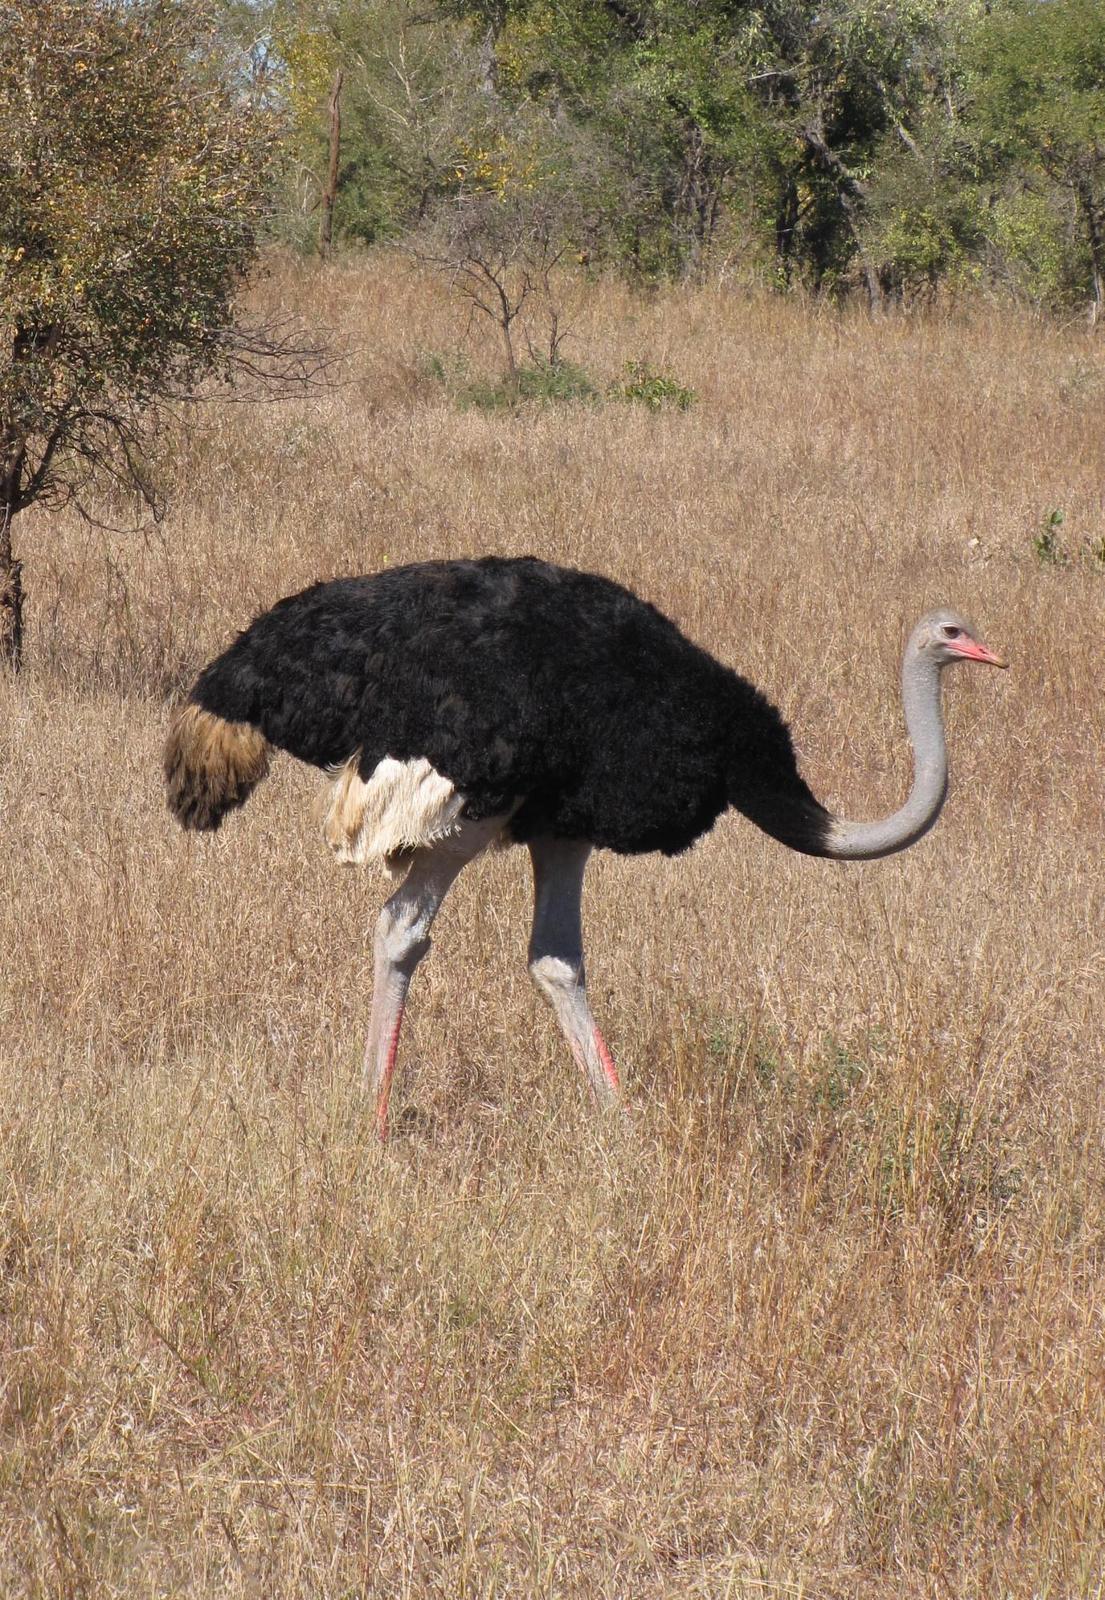 Common Ostrich Photo by Richard  Lowe